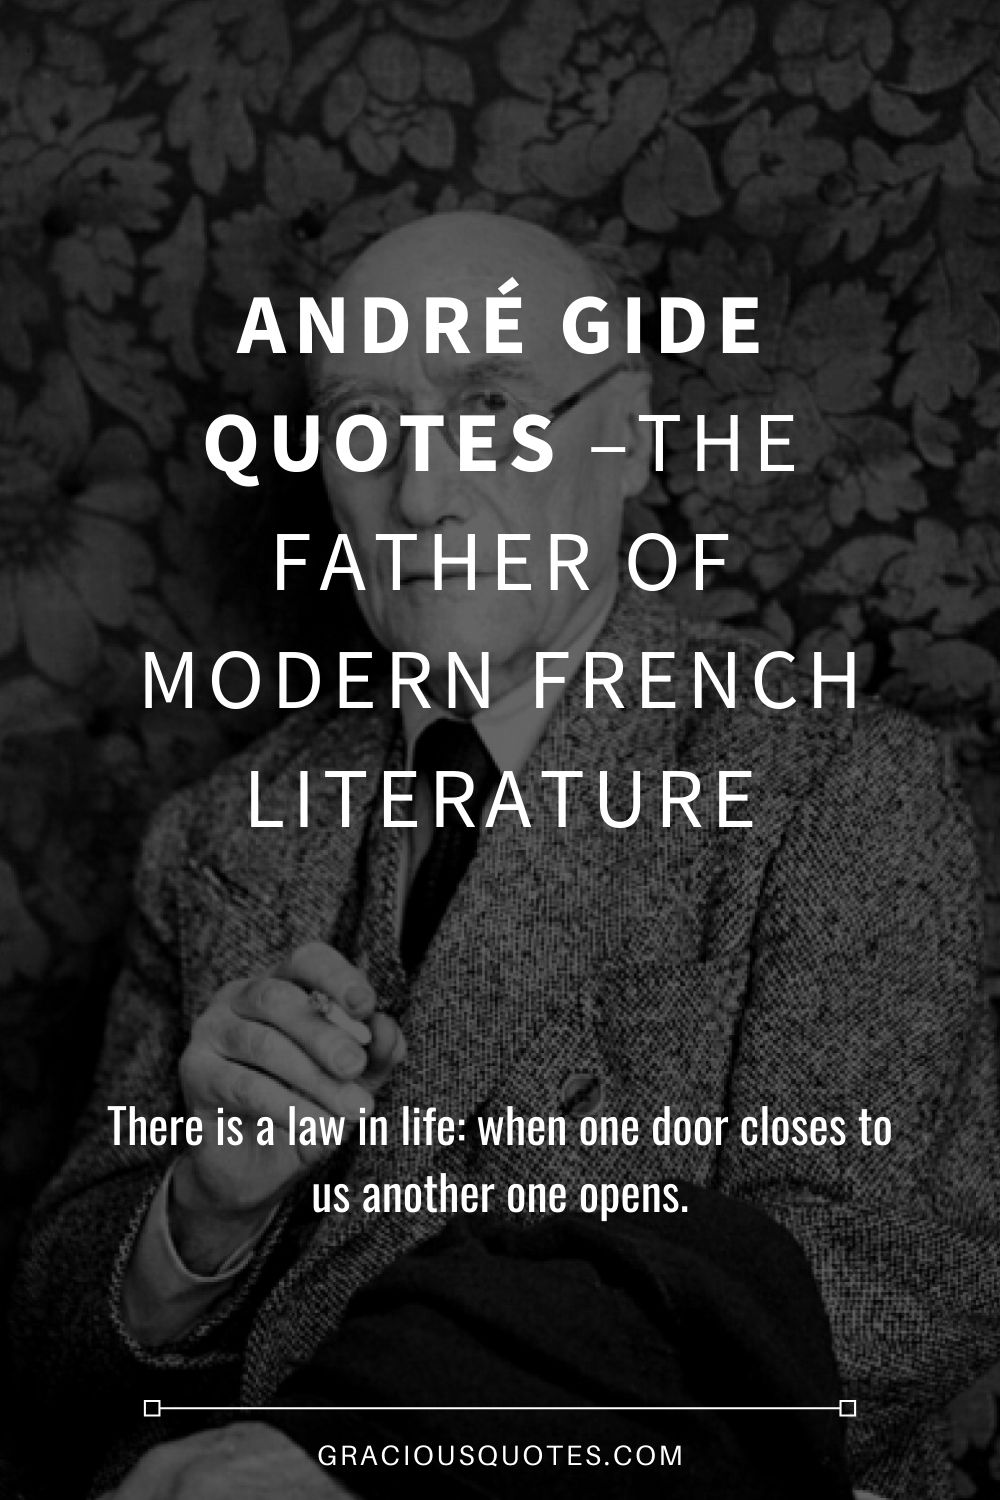 ANDRÉ-GIDE-QUOTES-–The-FATHER-OF-MODERN-FRENCH-LITERATURE-Gracious-Quotes